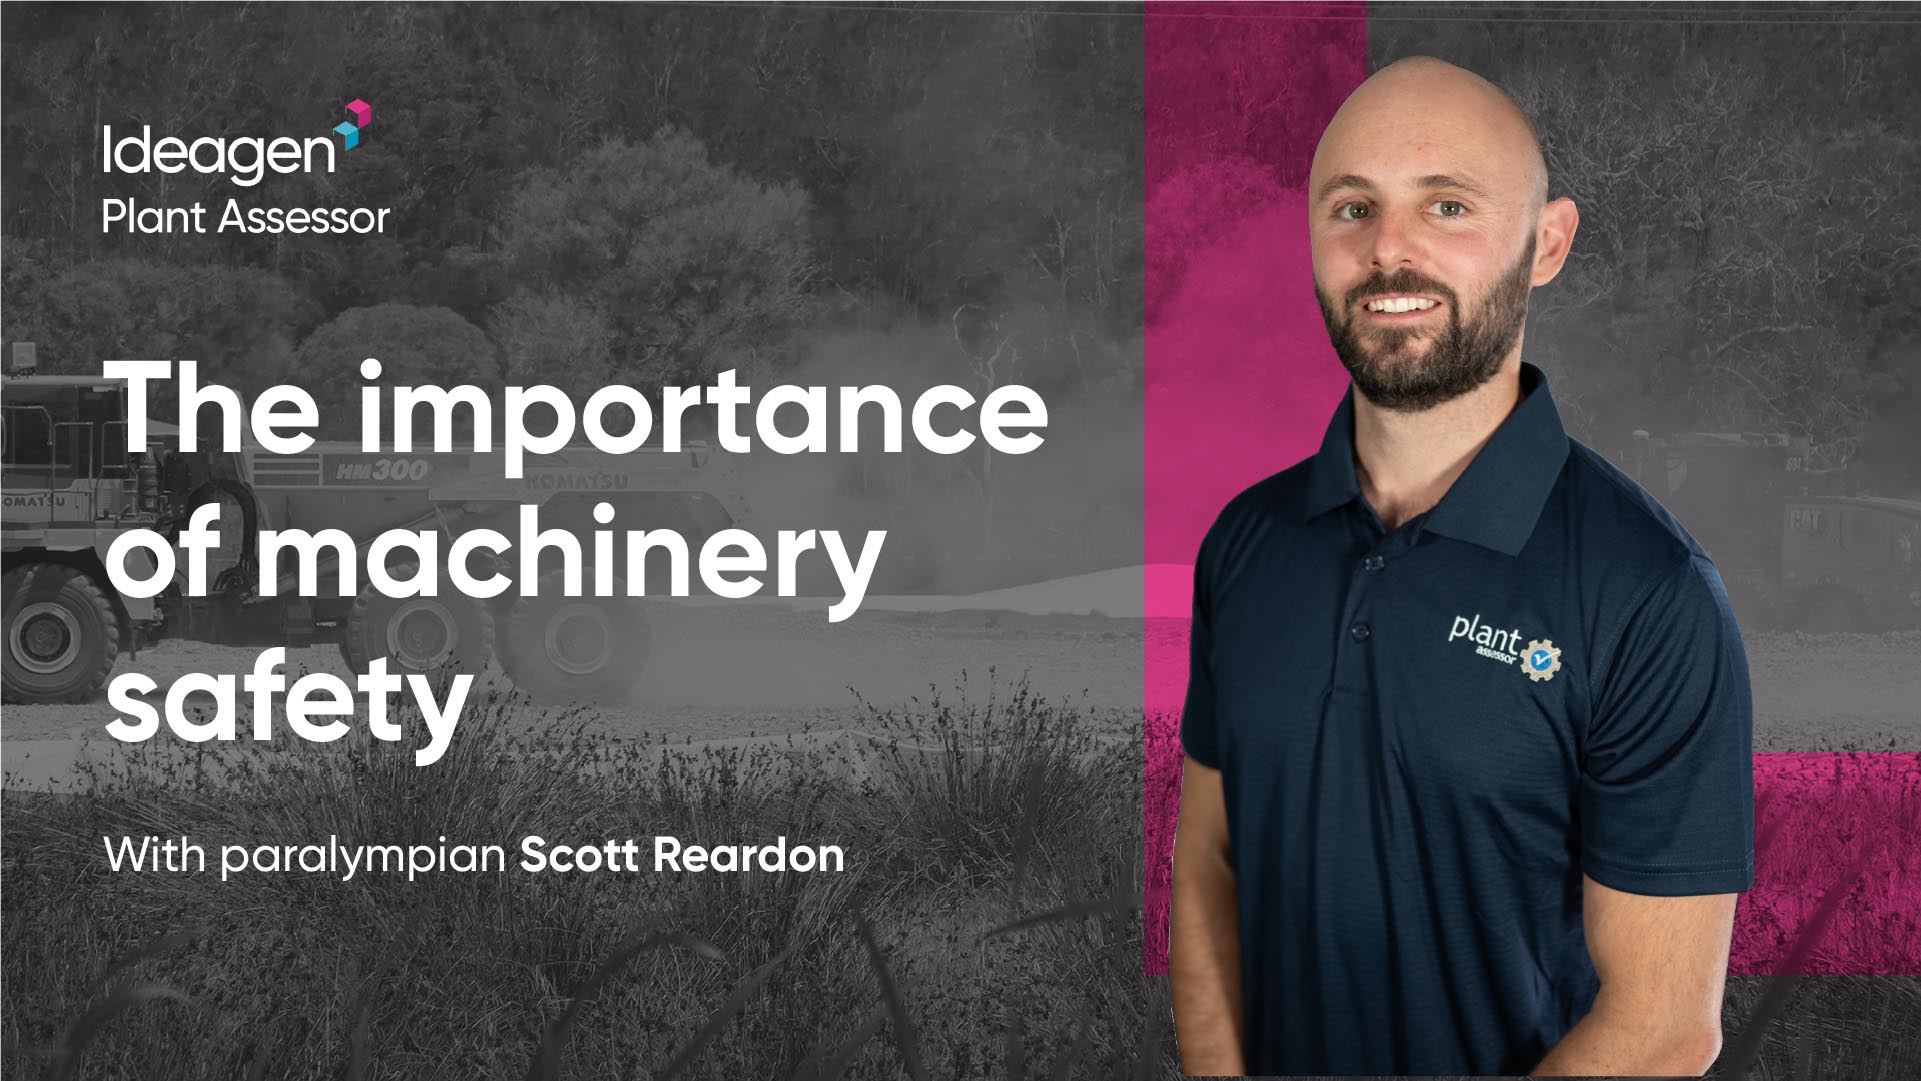 The Importance of Machinery Safety with Scott Reardon: Video